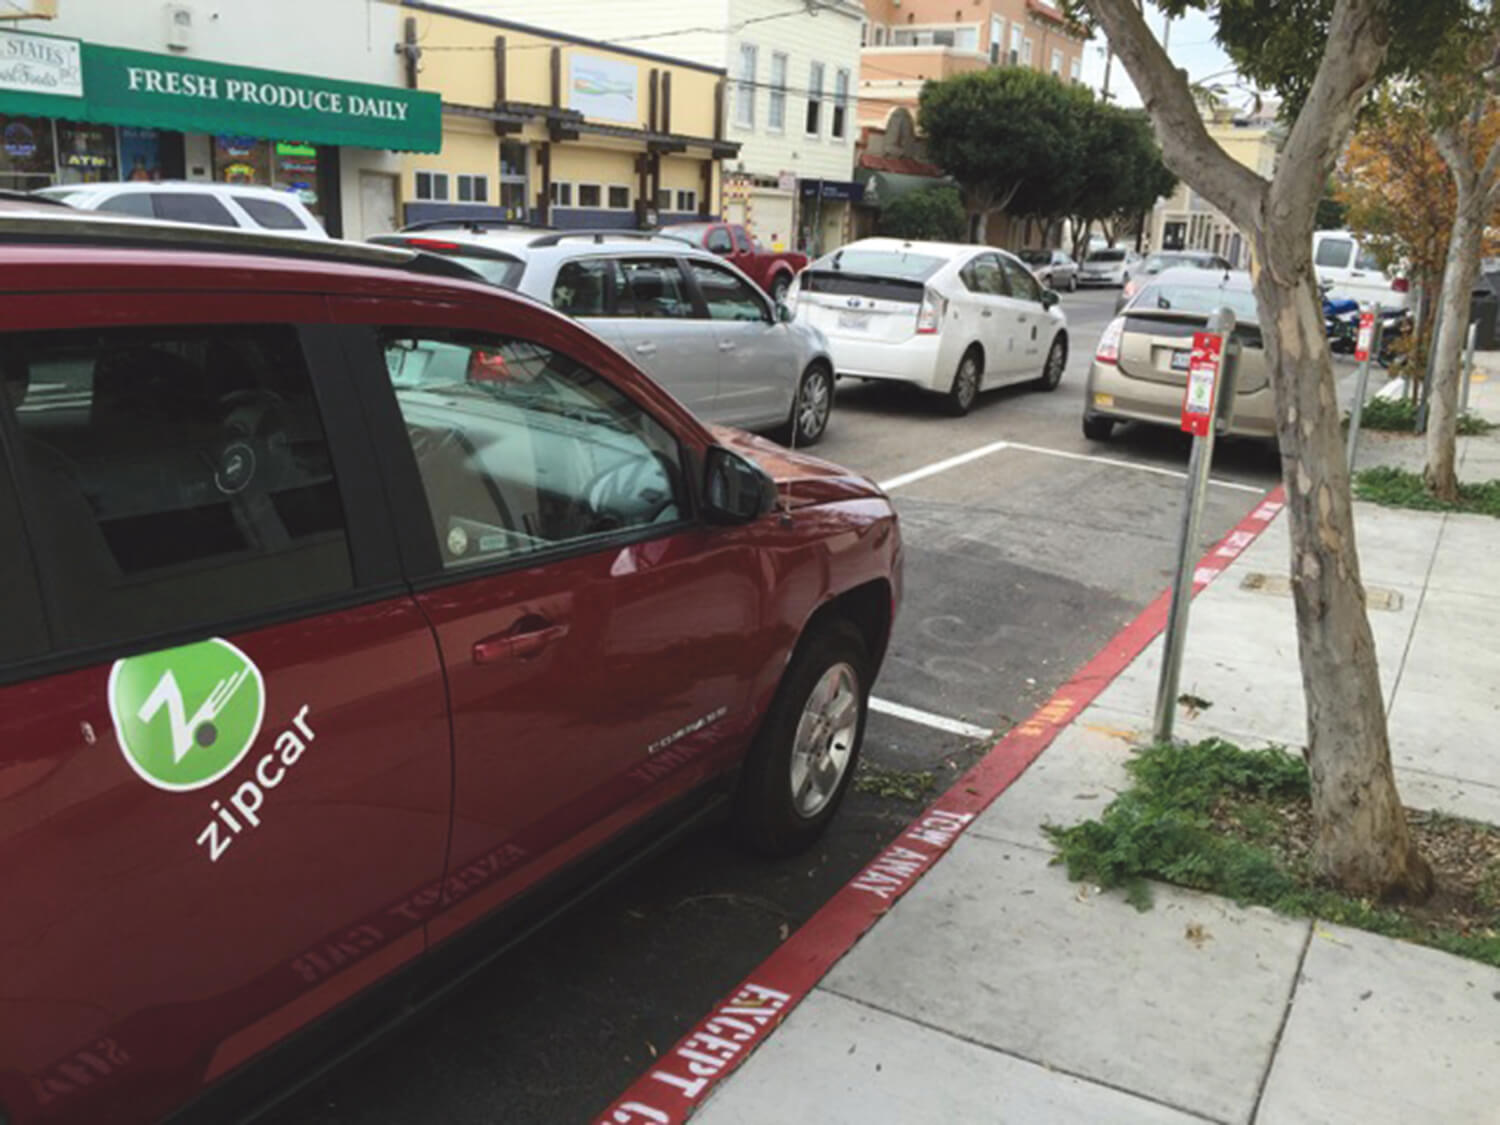 Car Sharing Programs Need To Share Public Parking Spaces Say Merchant